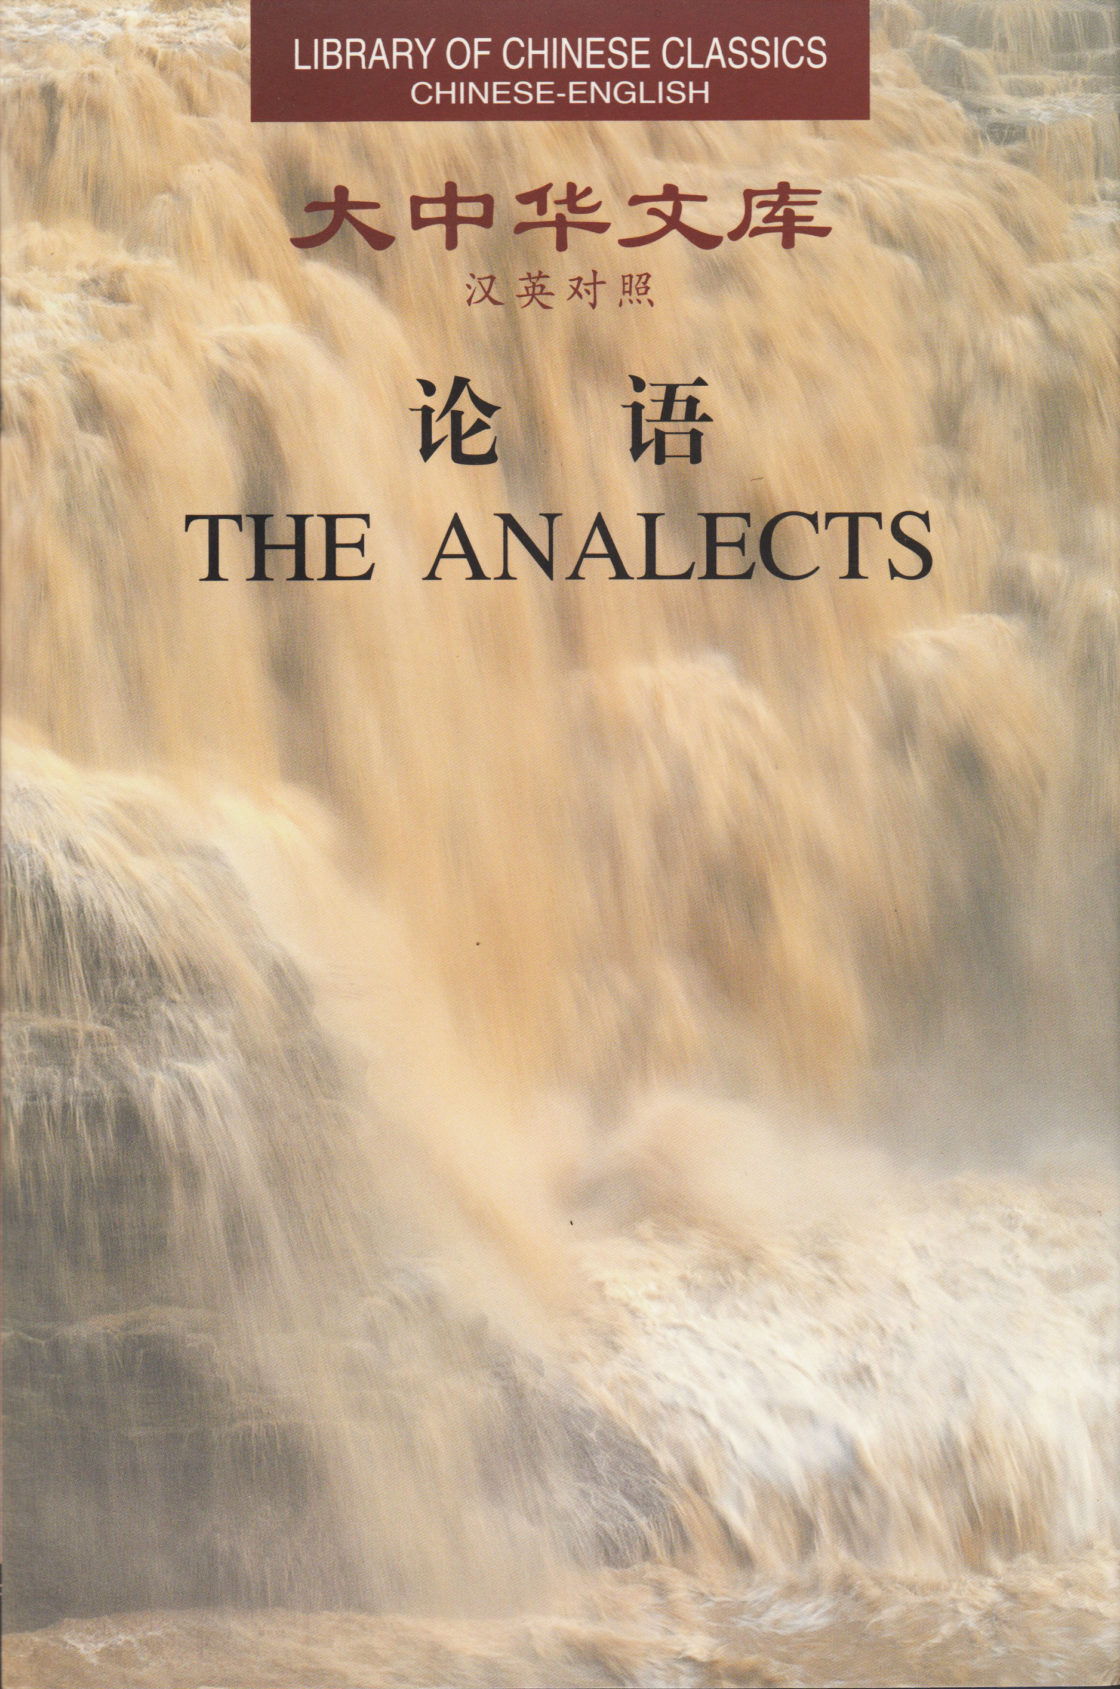 The Analects (Chinese, Bilingual edition, Chinese-English)